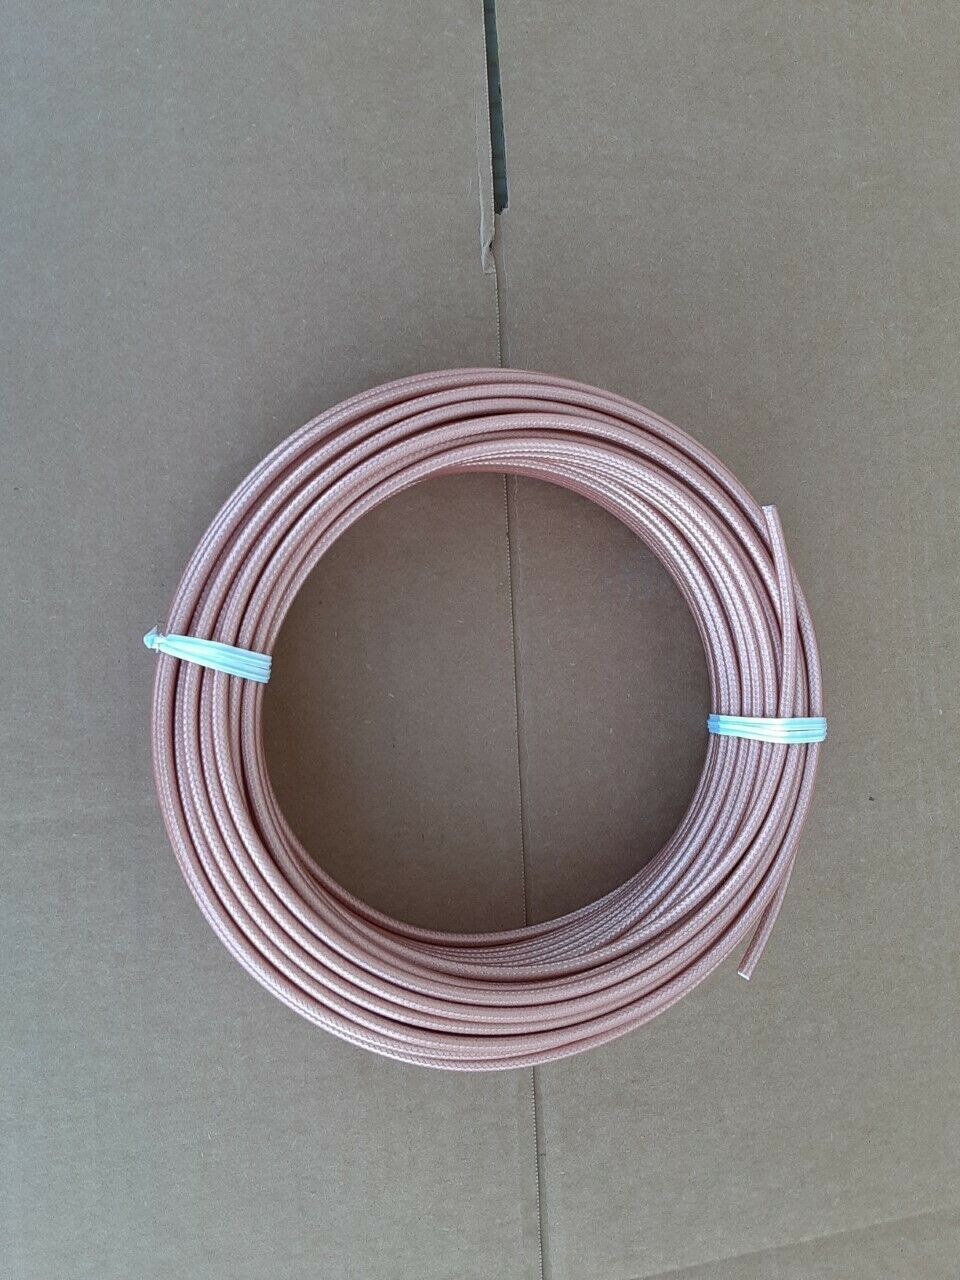 RG-400 Double Shielded Bulk 50 Ohm High Temperature Coax Cable 25 FT